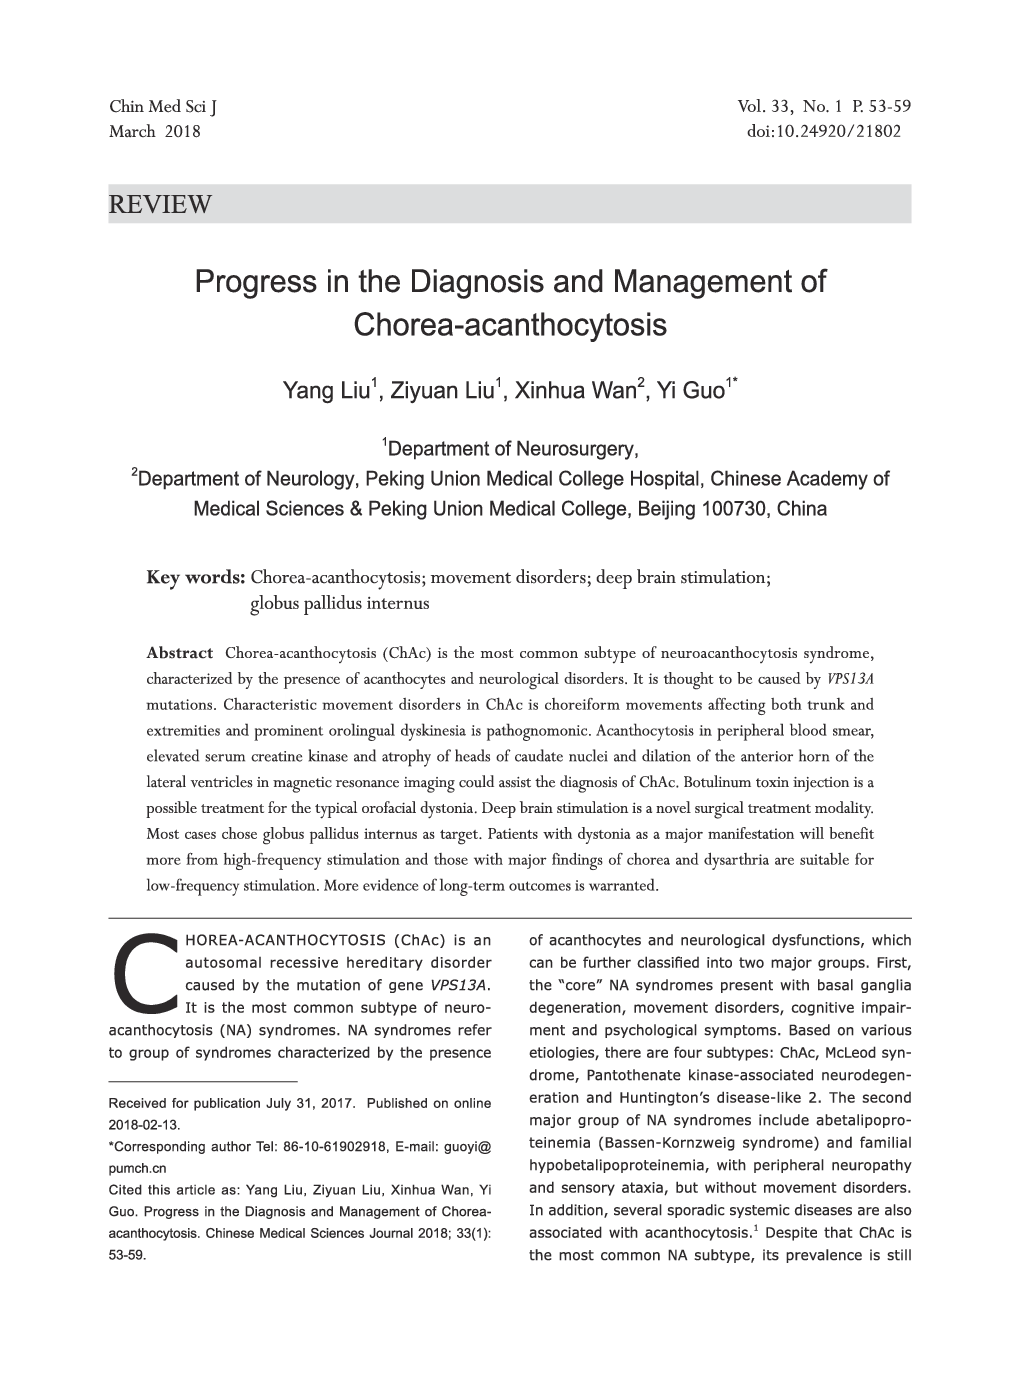 Progress in the Diagnosis and Management of Chorea-acanthocytosis